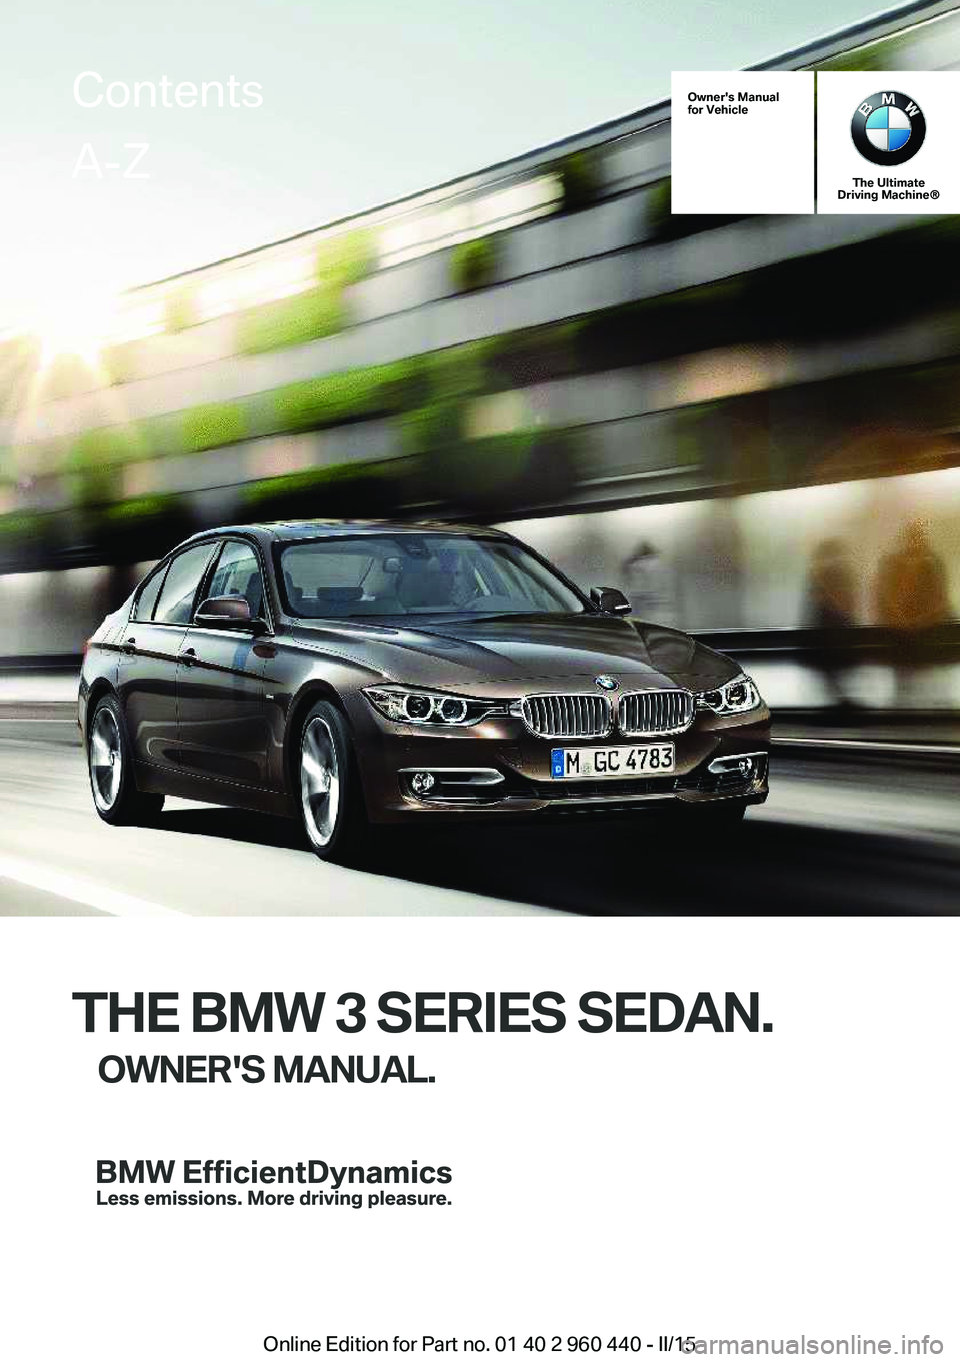 BMW 320i SEDAN 2016  Owners Manual Owner's Manual
for Vehicle
The Ultimate
Driving Machine®
THE BMW 3 SERIES SEDAN.
OWNER'S MANUAL.
ContentsA-Z
Online Edition for Part no. 01 40 2 960 440 - II/15   